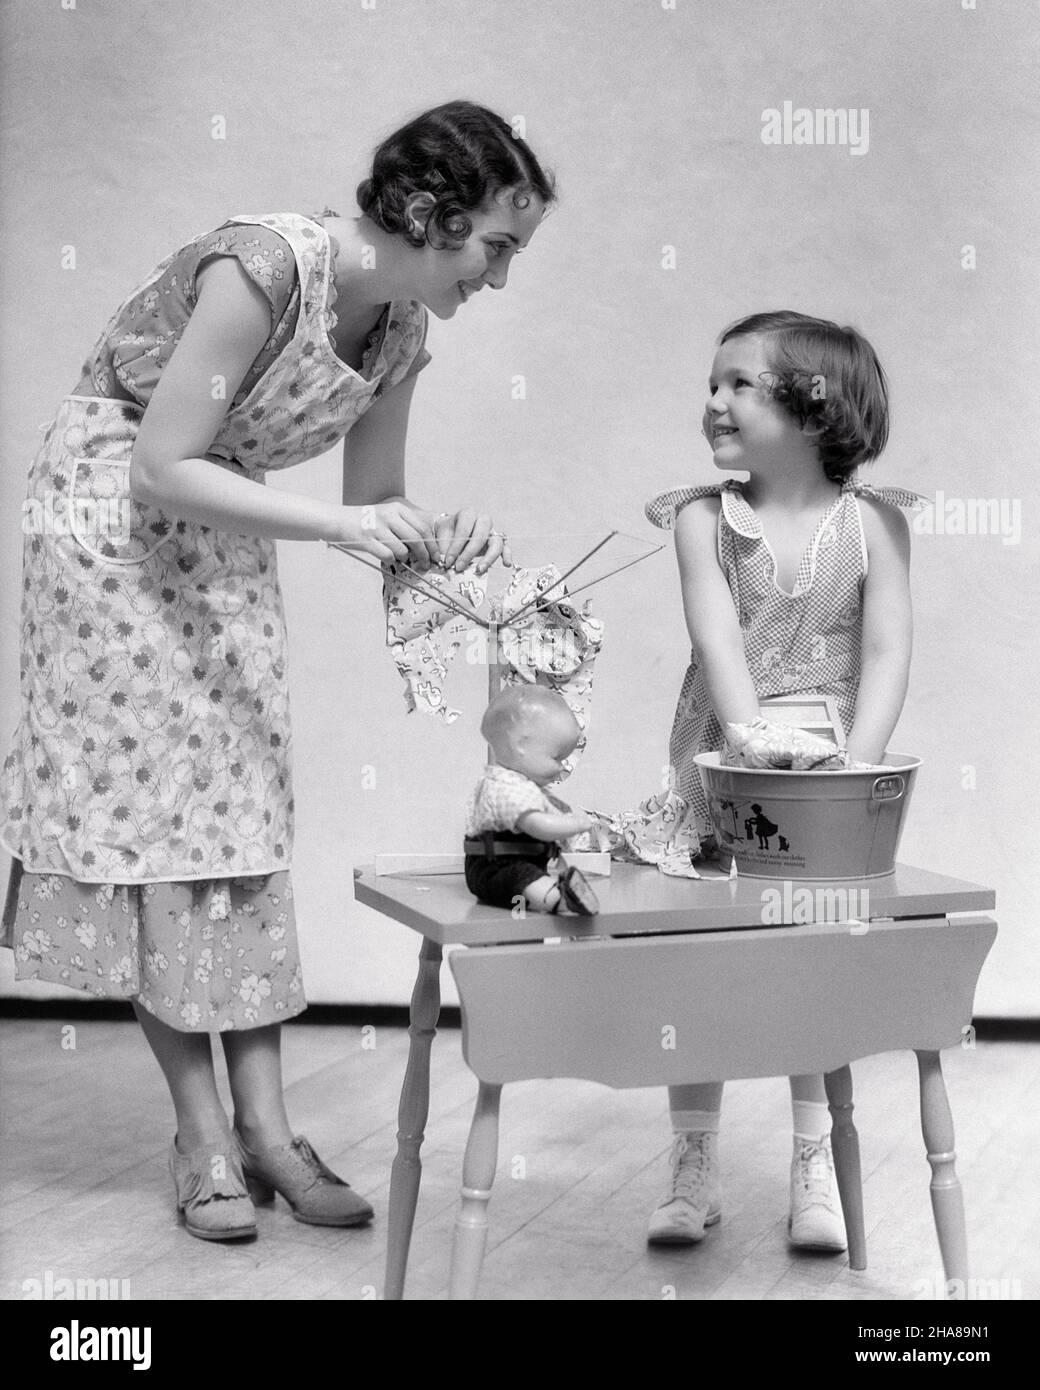 https://c8.alamy.com/comp/2HA89N1/1930s-little-girl-daughter-hand-washing-toy-doll-clothes-a-woman-her-mother-helping-by-hanging-them-to-dry-on-toy-clothesline-j6812-har001-hars-nostalgic-pair-domestic-her-mothers-dolls-wash-old-time-busy-teaching-nostalgia-old-fashion-1-household-juvenile-young-adult-teamwork-pleased-families-joy-lifestyle-satisfaction-chores-females-studio-shot-home-life-friendship-full-length-ladies-dry-daughters-persons-confidence-bw-brunette-homemaker-happiness-homemakers-cheerful-chore-housewives-smiles-tasks-connection-conceptual-joyful-support-growth-juveniles-moms-task-togetherness-2HA89N1.jpg